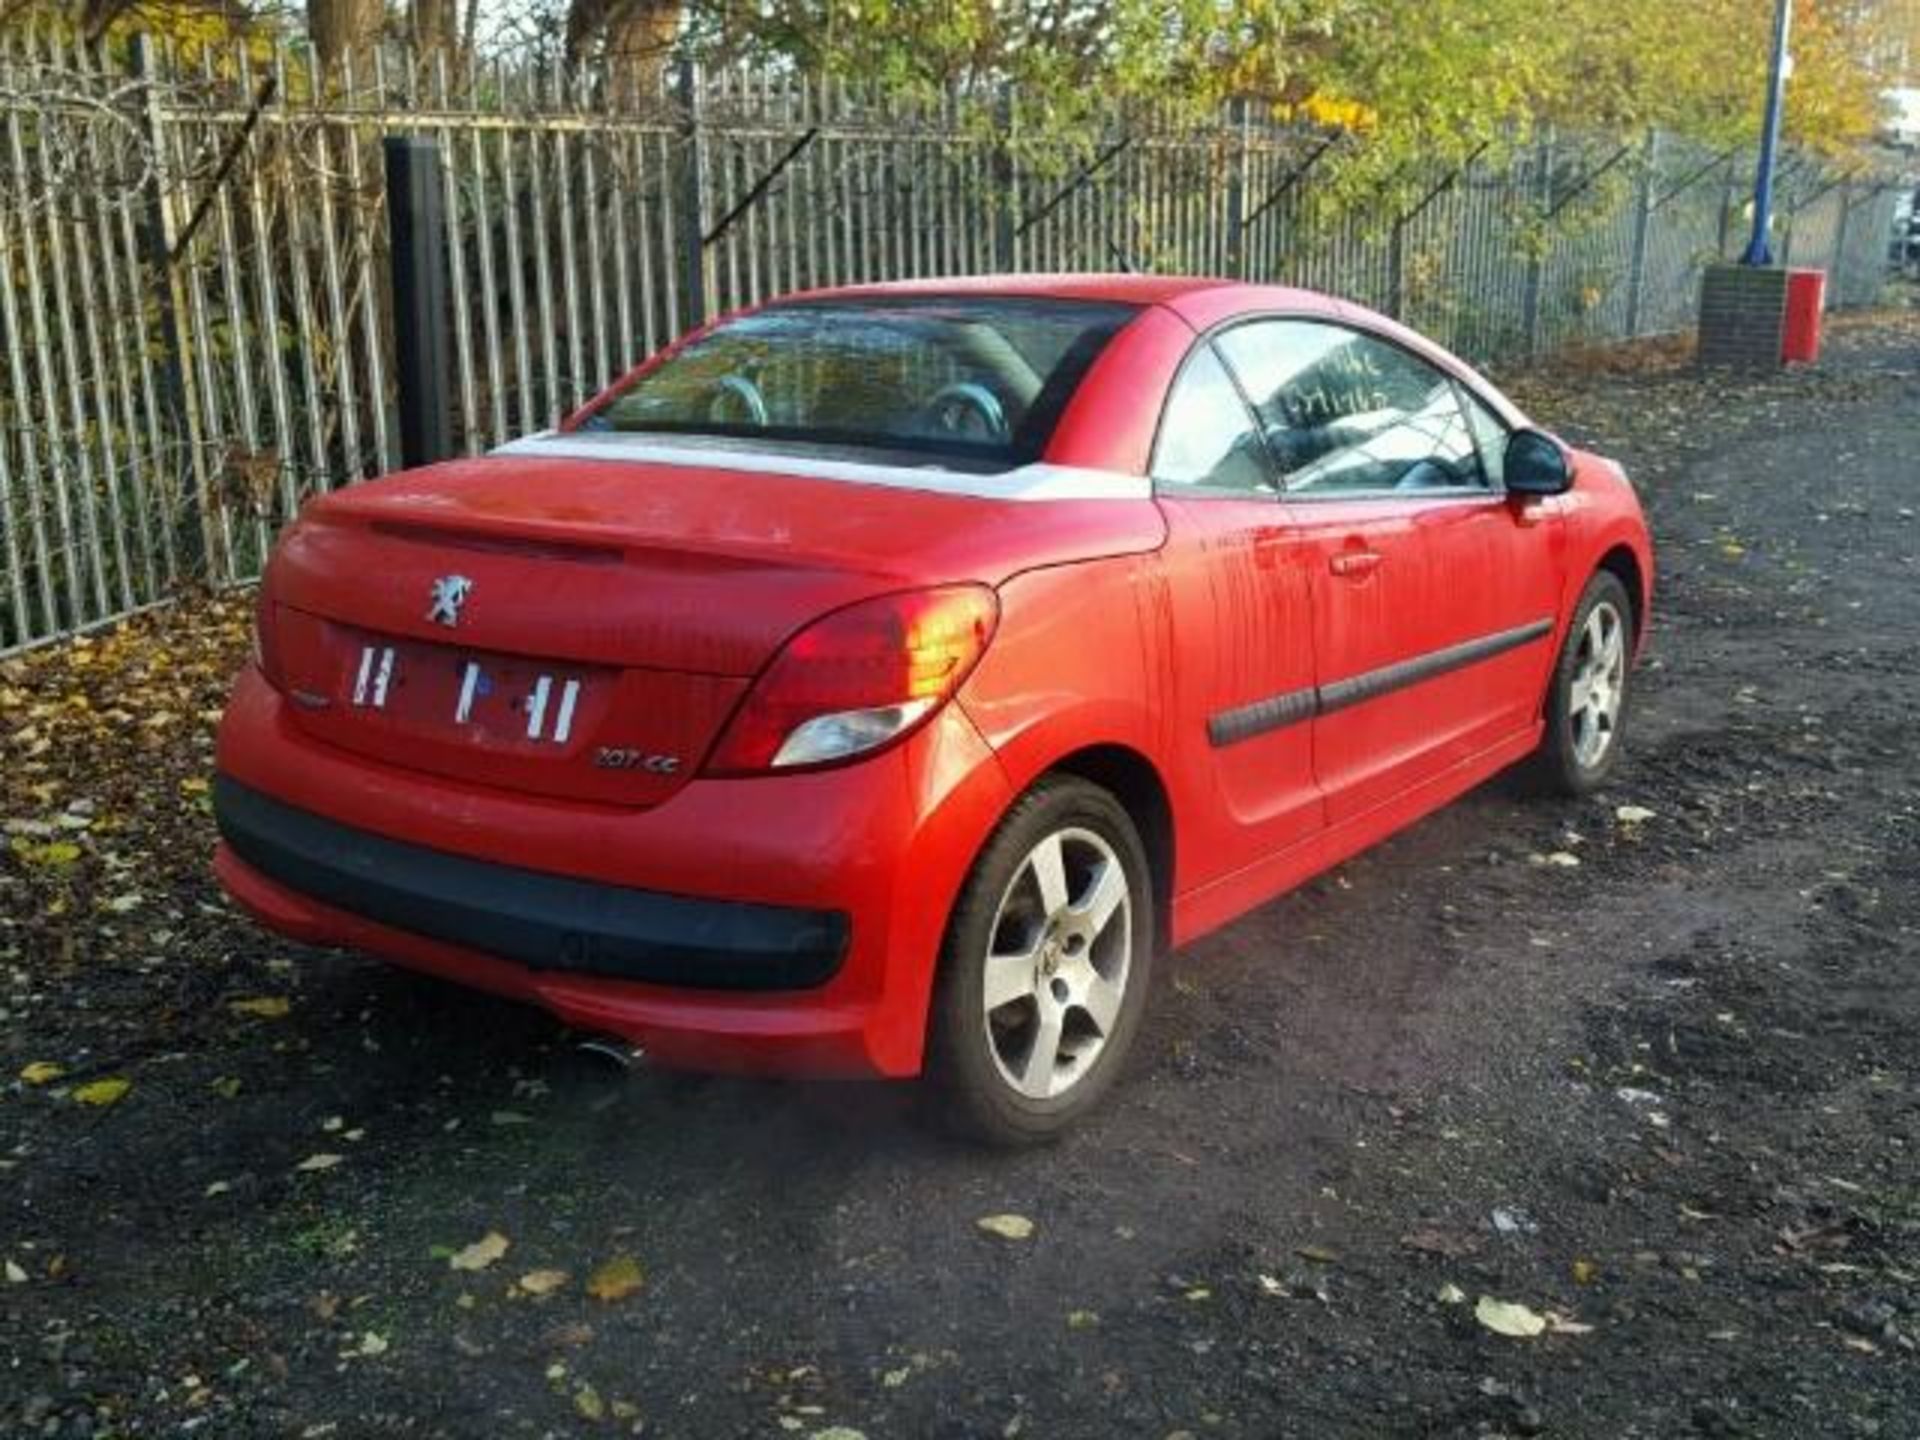 Peugeot 207 Sports Convertible 1598Cc - No VAT on Hammer - Image 10 of 12